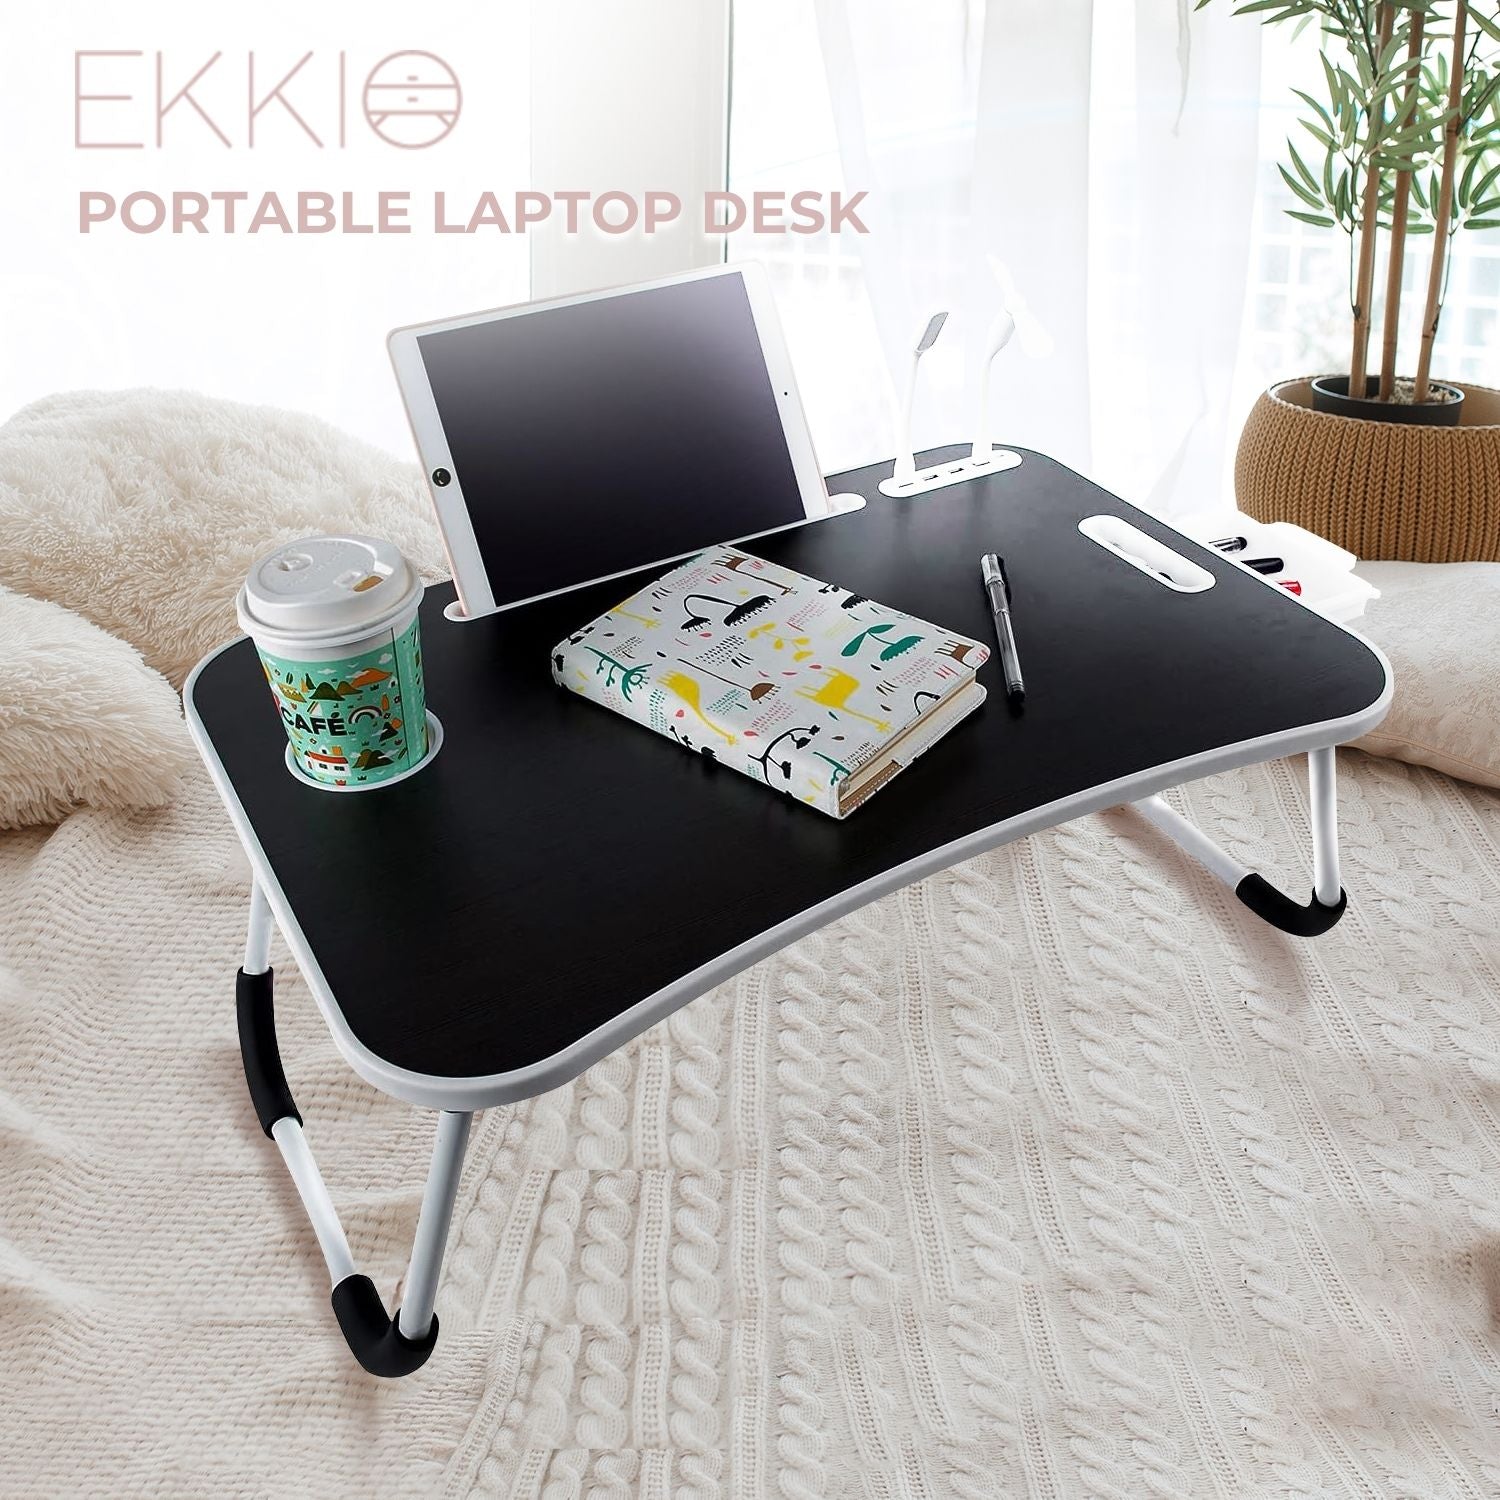 EKKIO Multifunctional Portable Bed Tray Laptop Desk with USB Charge Port (Black)